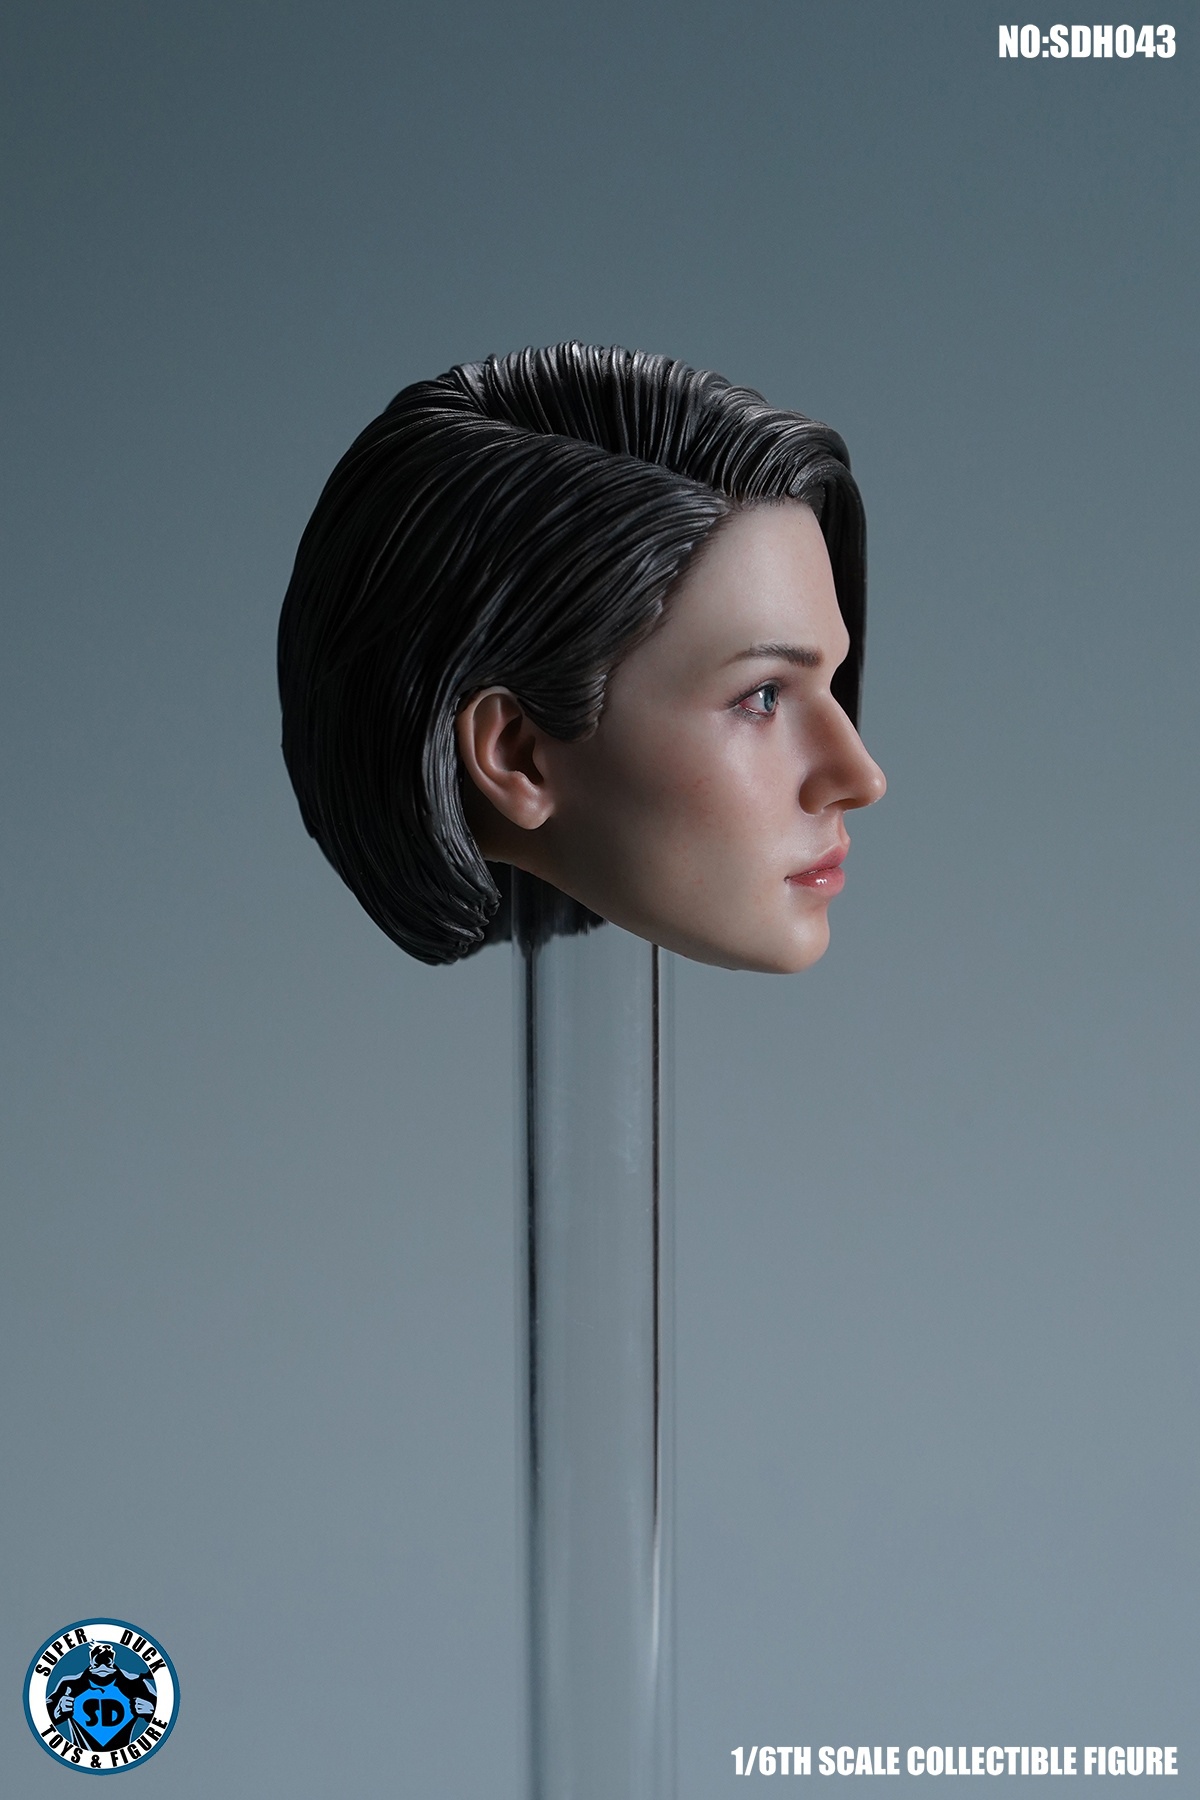 NEW PRODUCT: SUPER DUCK - SDH043 biochemical policewoman head carving 0491